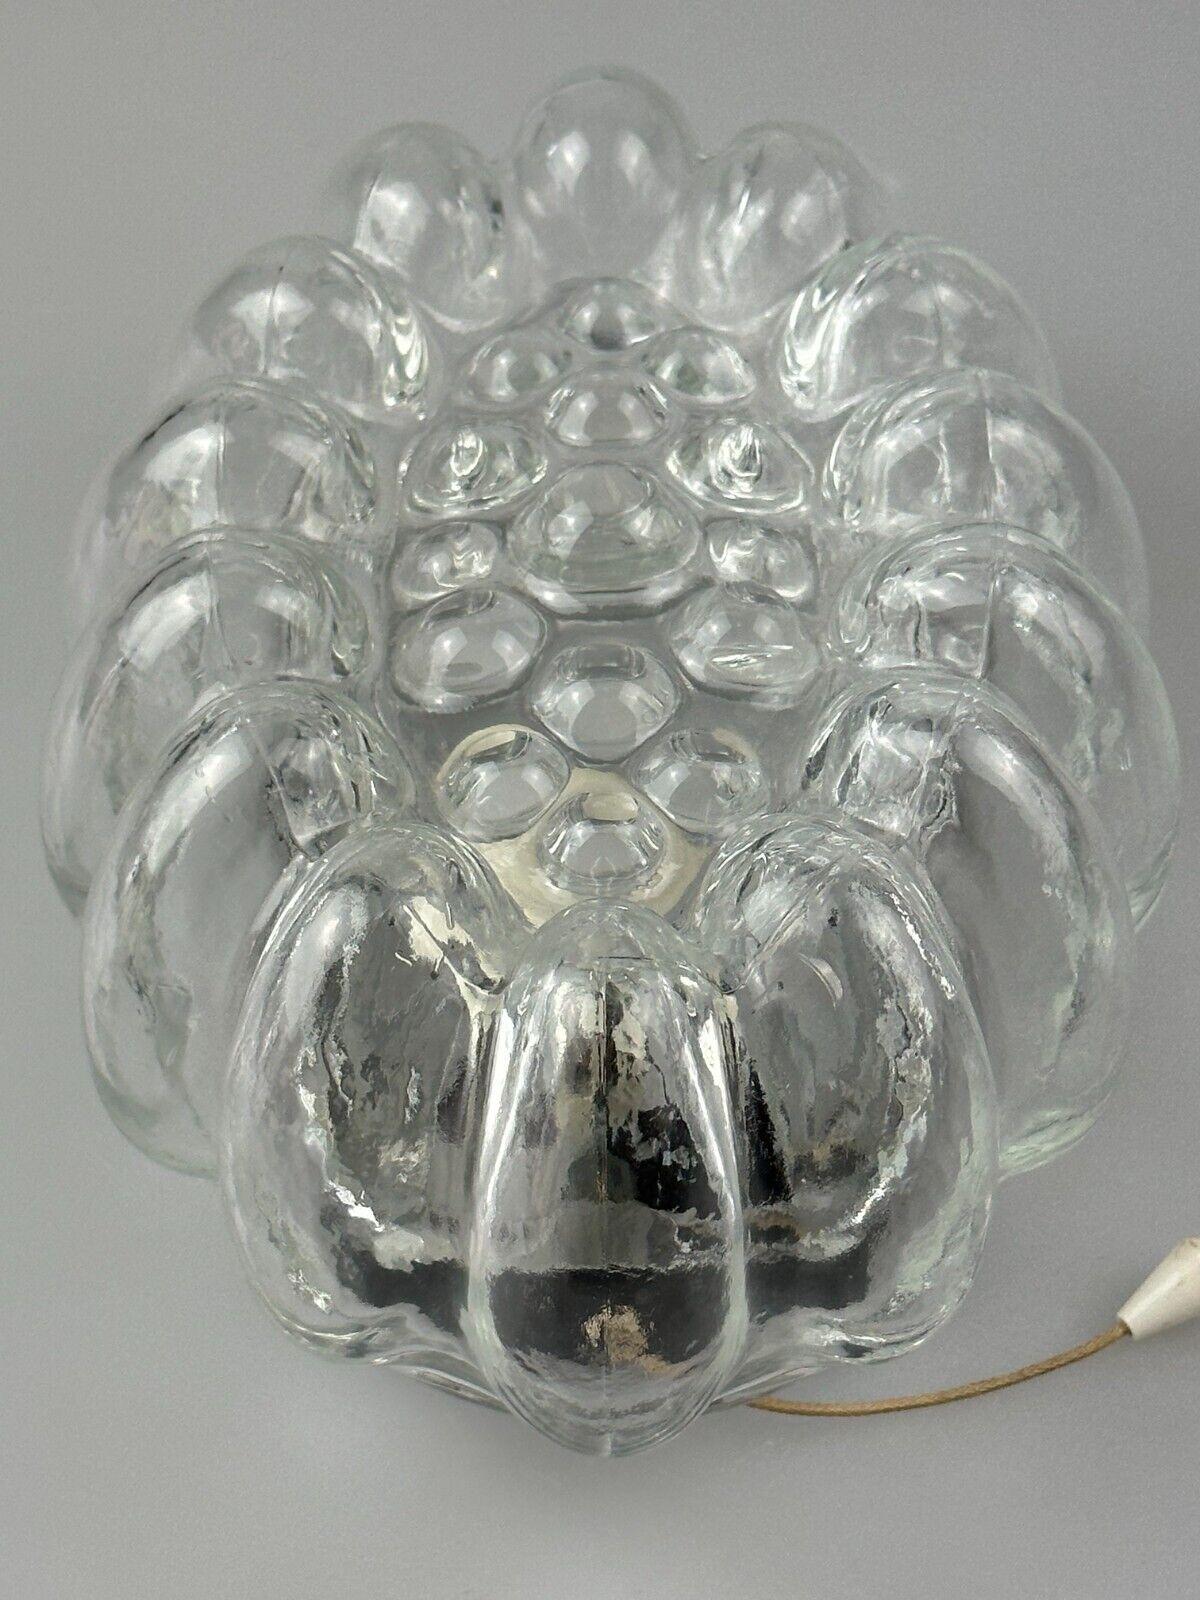 60s 70s wall lamp made of glass & metal bubble wall sconce space age design For Sale 8